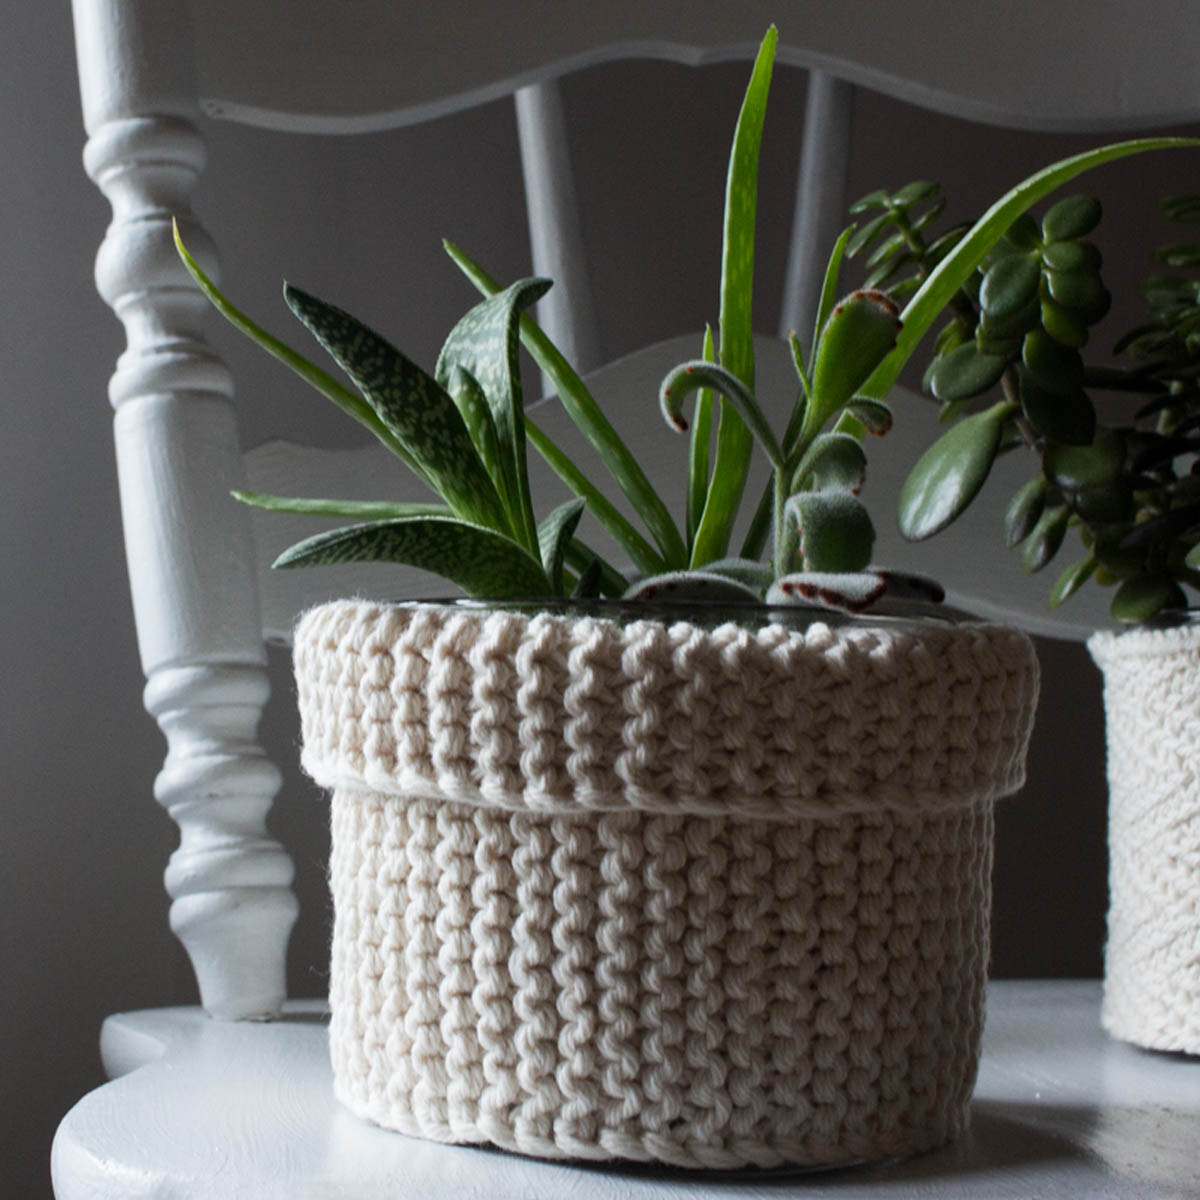 pic of a garter stitch knitted plant cozy